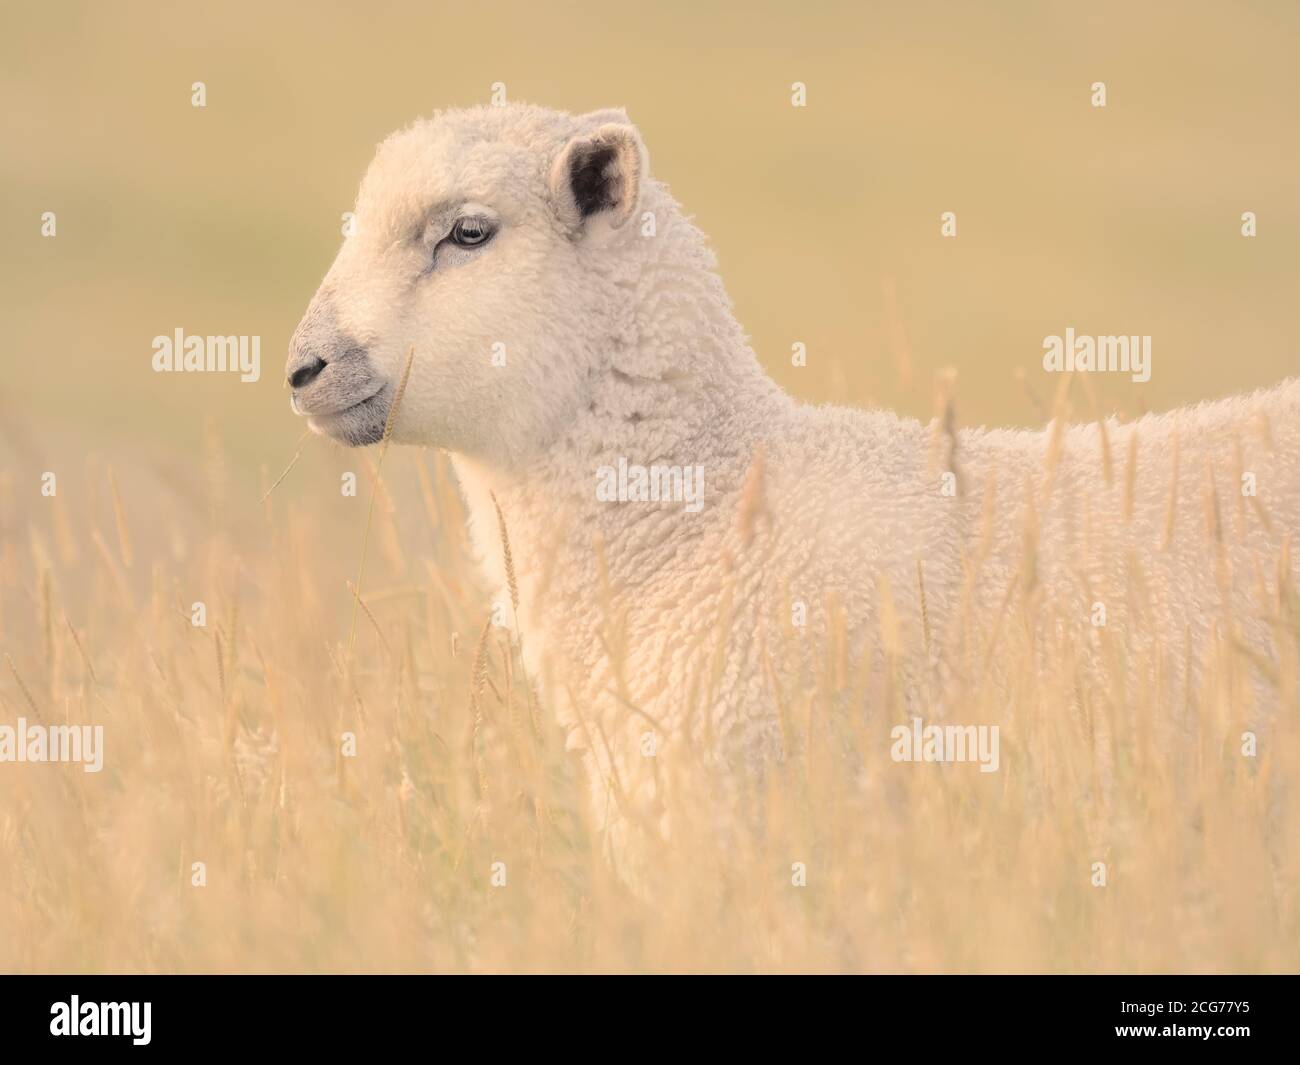 Close-up portrait of a lamb standing in a field eating grass, New Zealand Stock Photo